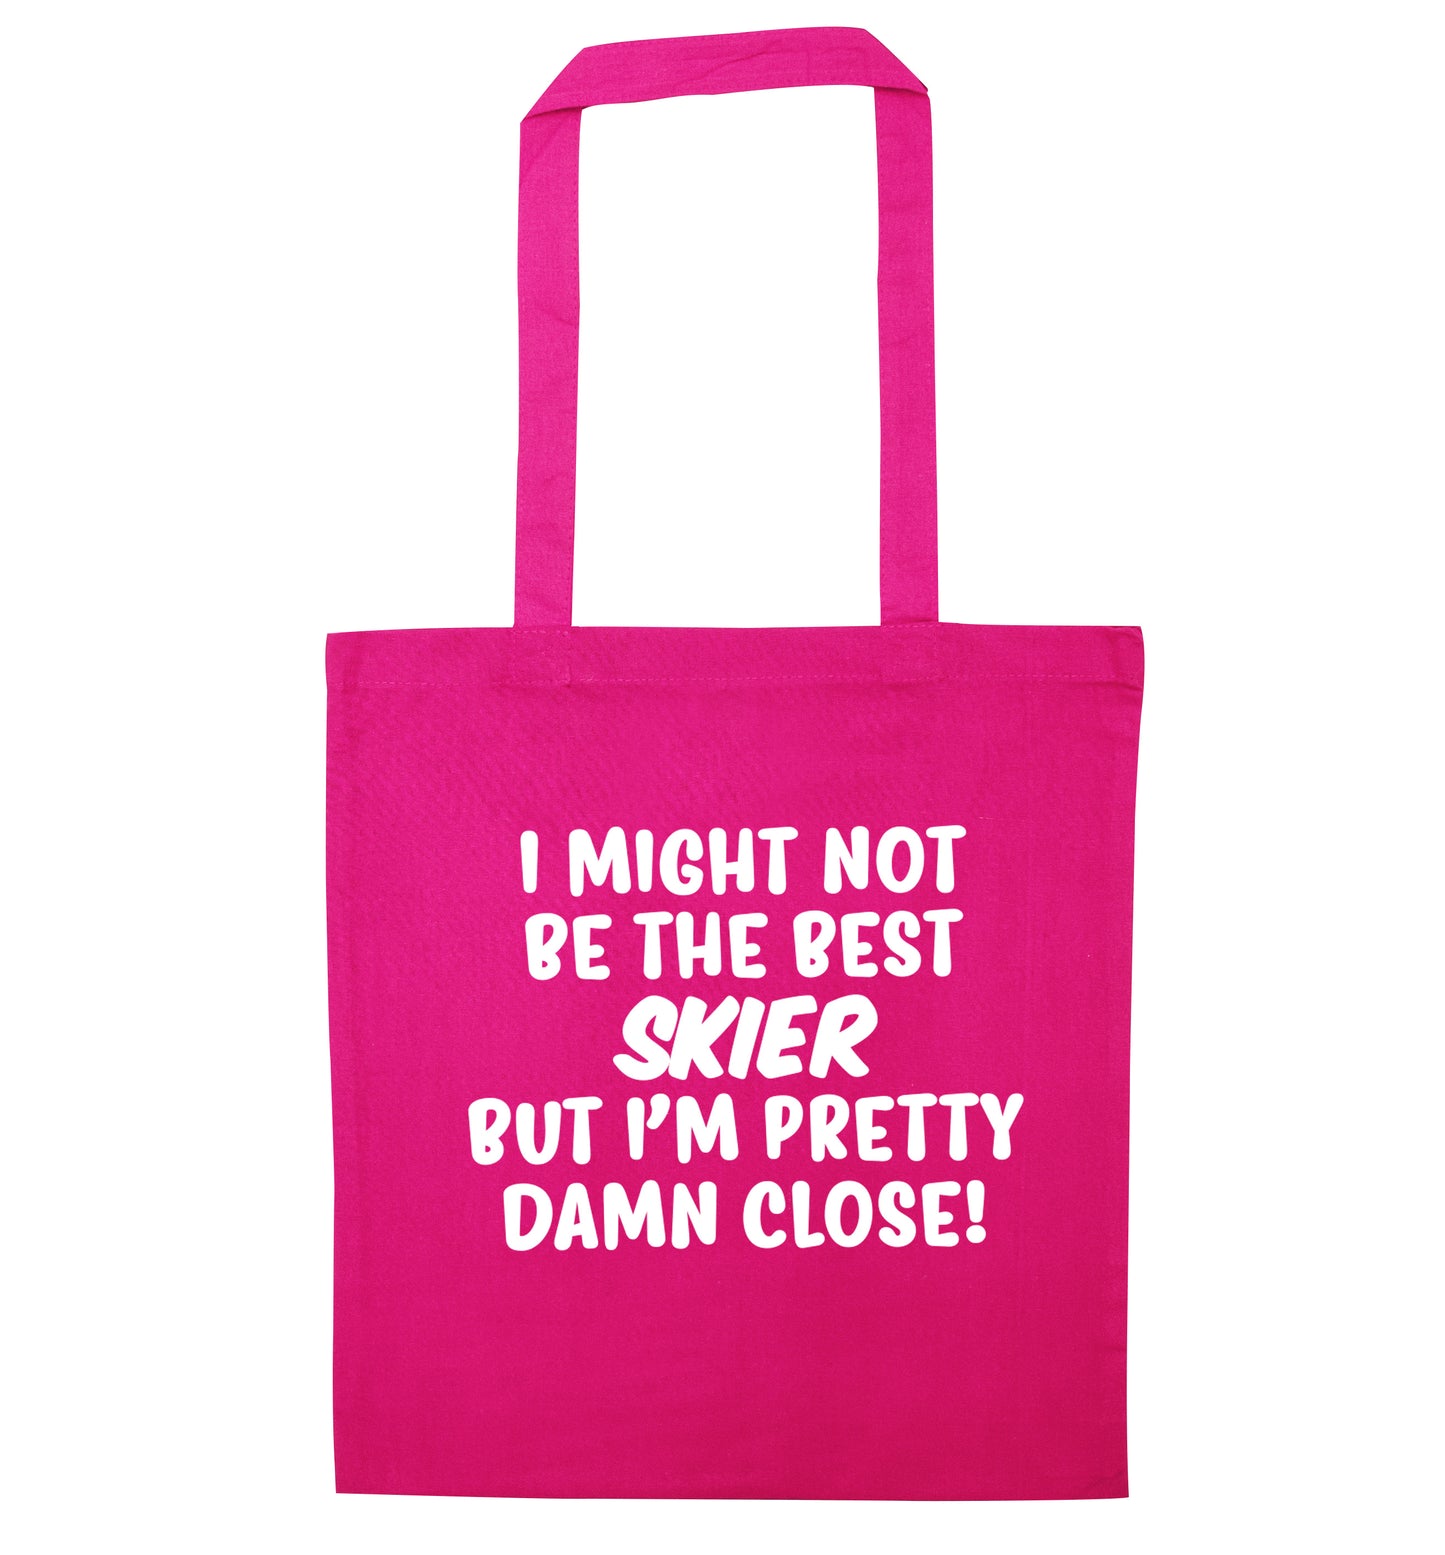 I might not be the best skier but I'm pretty damn close! pink tote bag